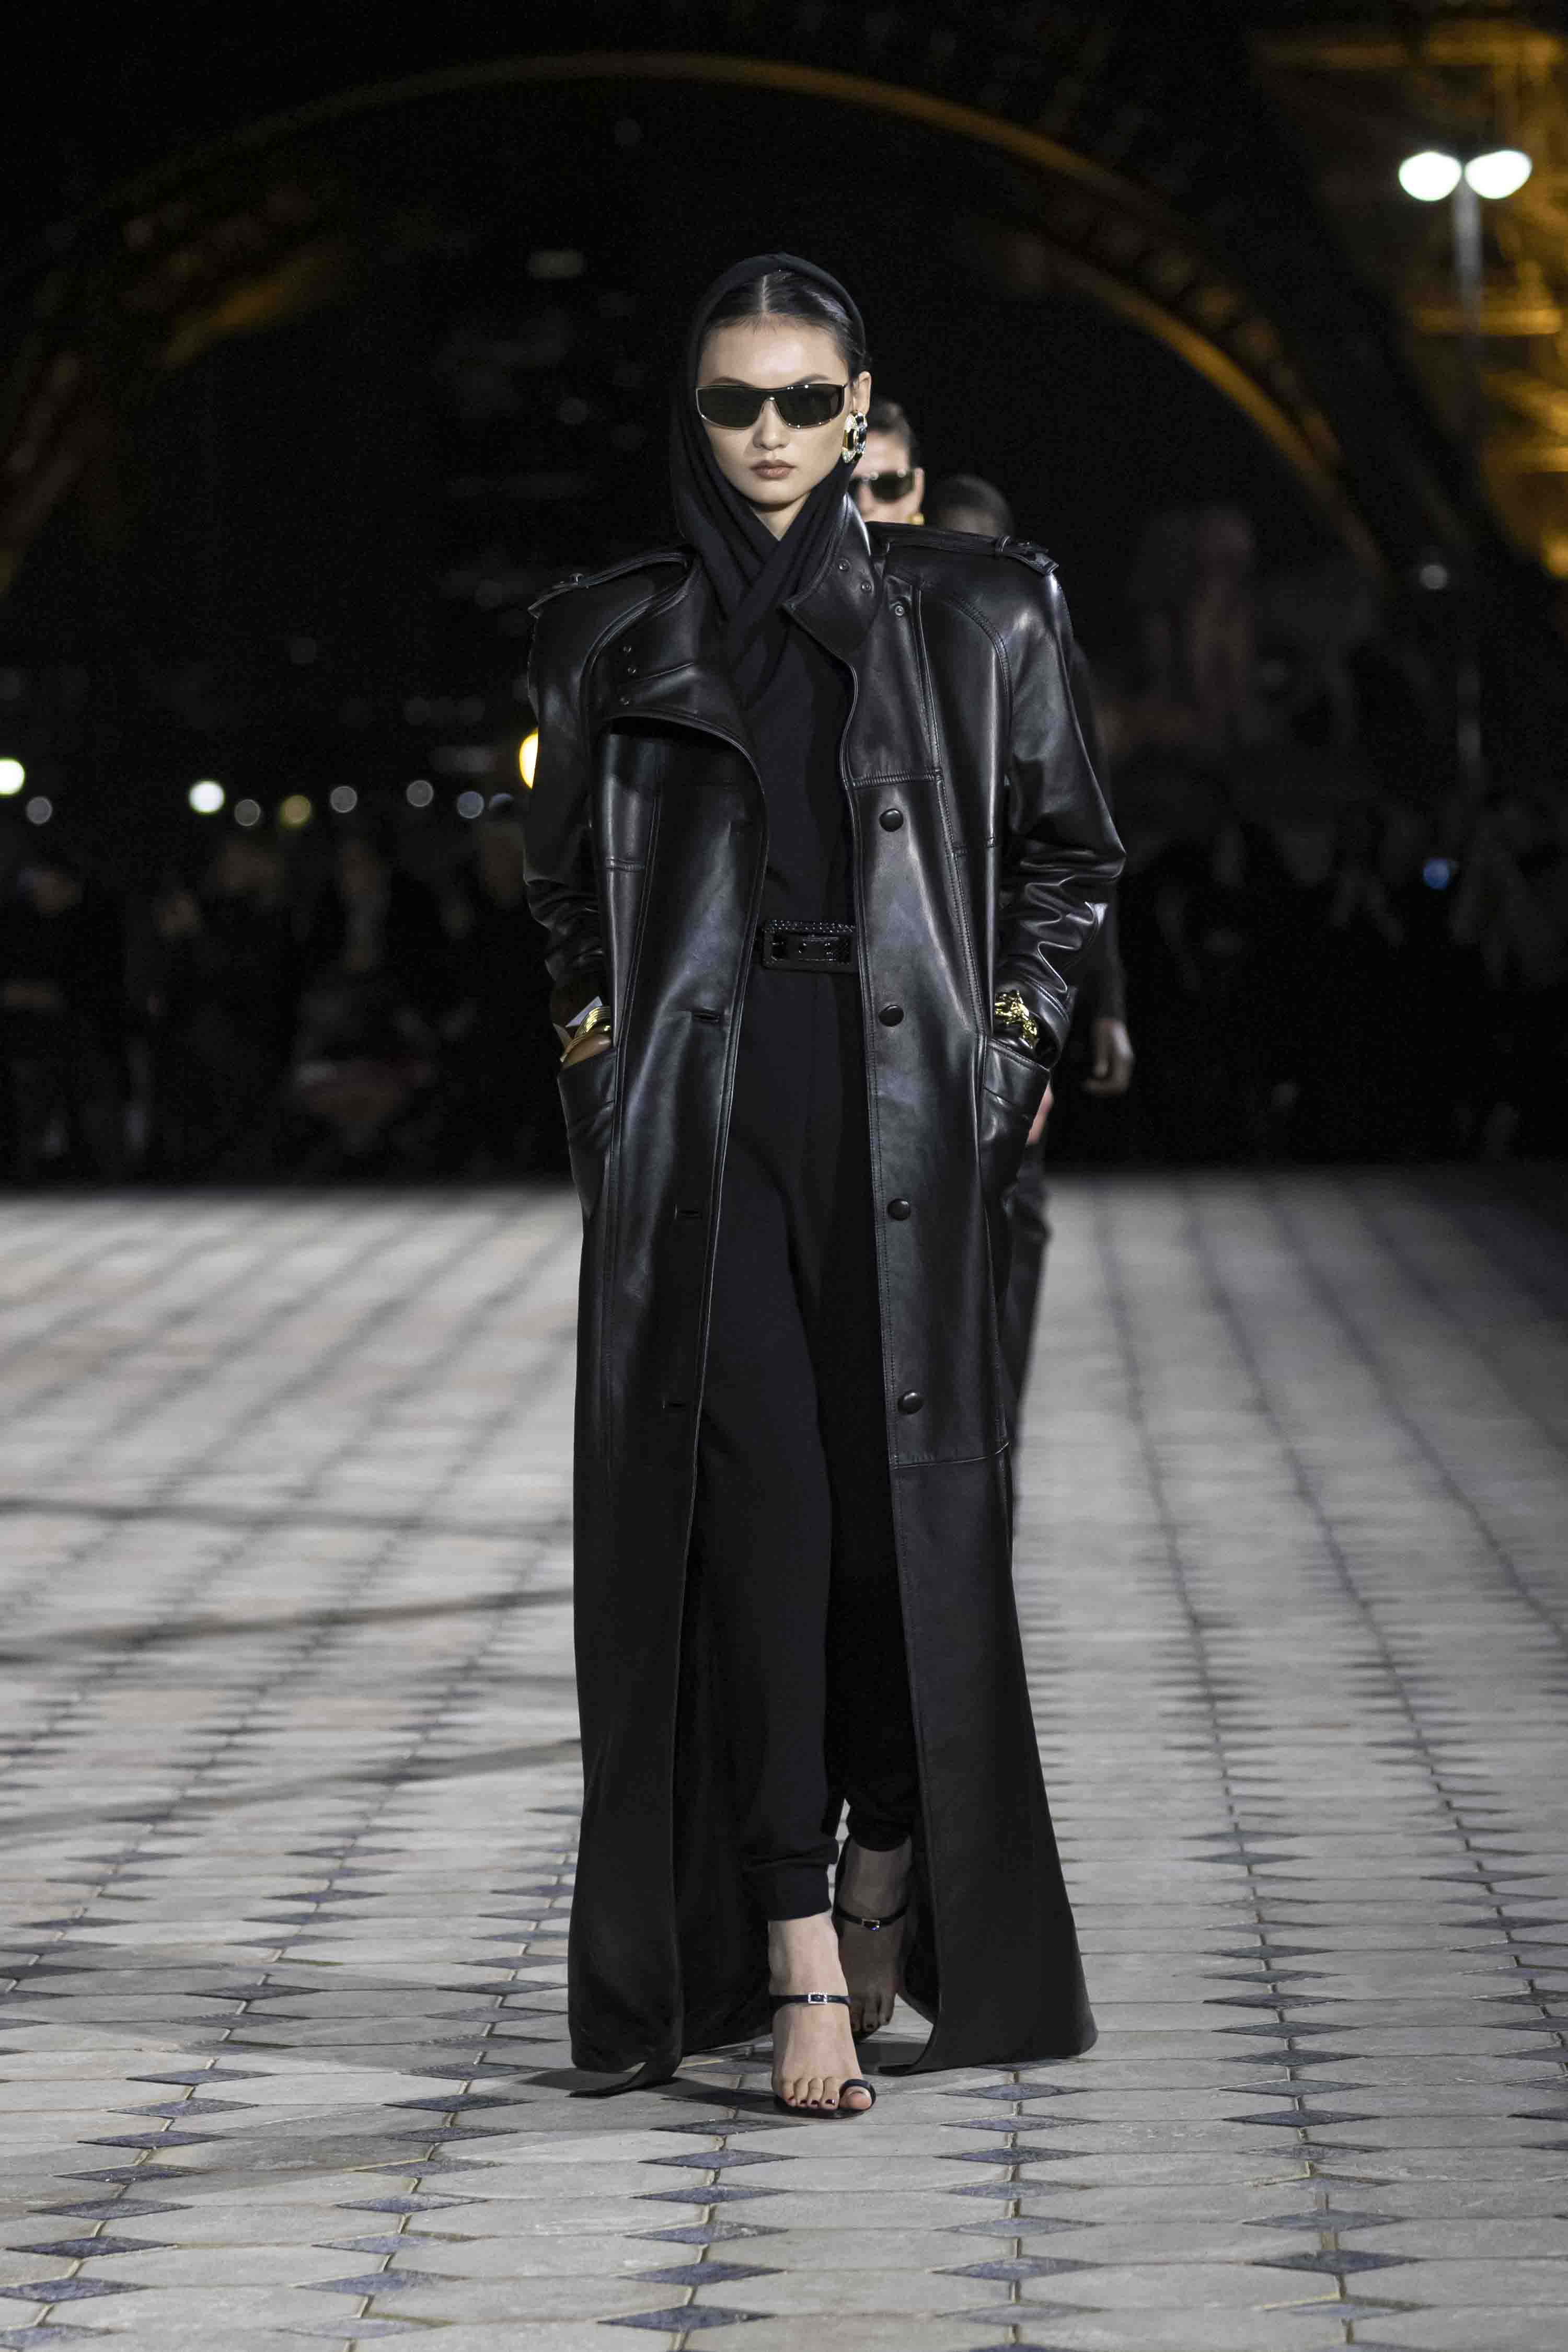 Summer 2023 Saint Laurent Women's Collection. A clear example of the brand's take on quiet luxury, which maintains the futuristic touches present in their 2008 collection. 